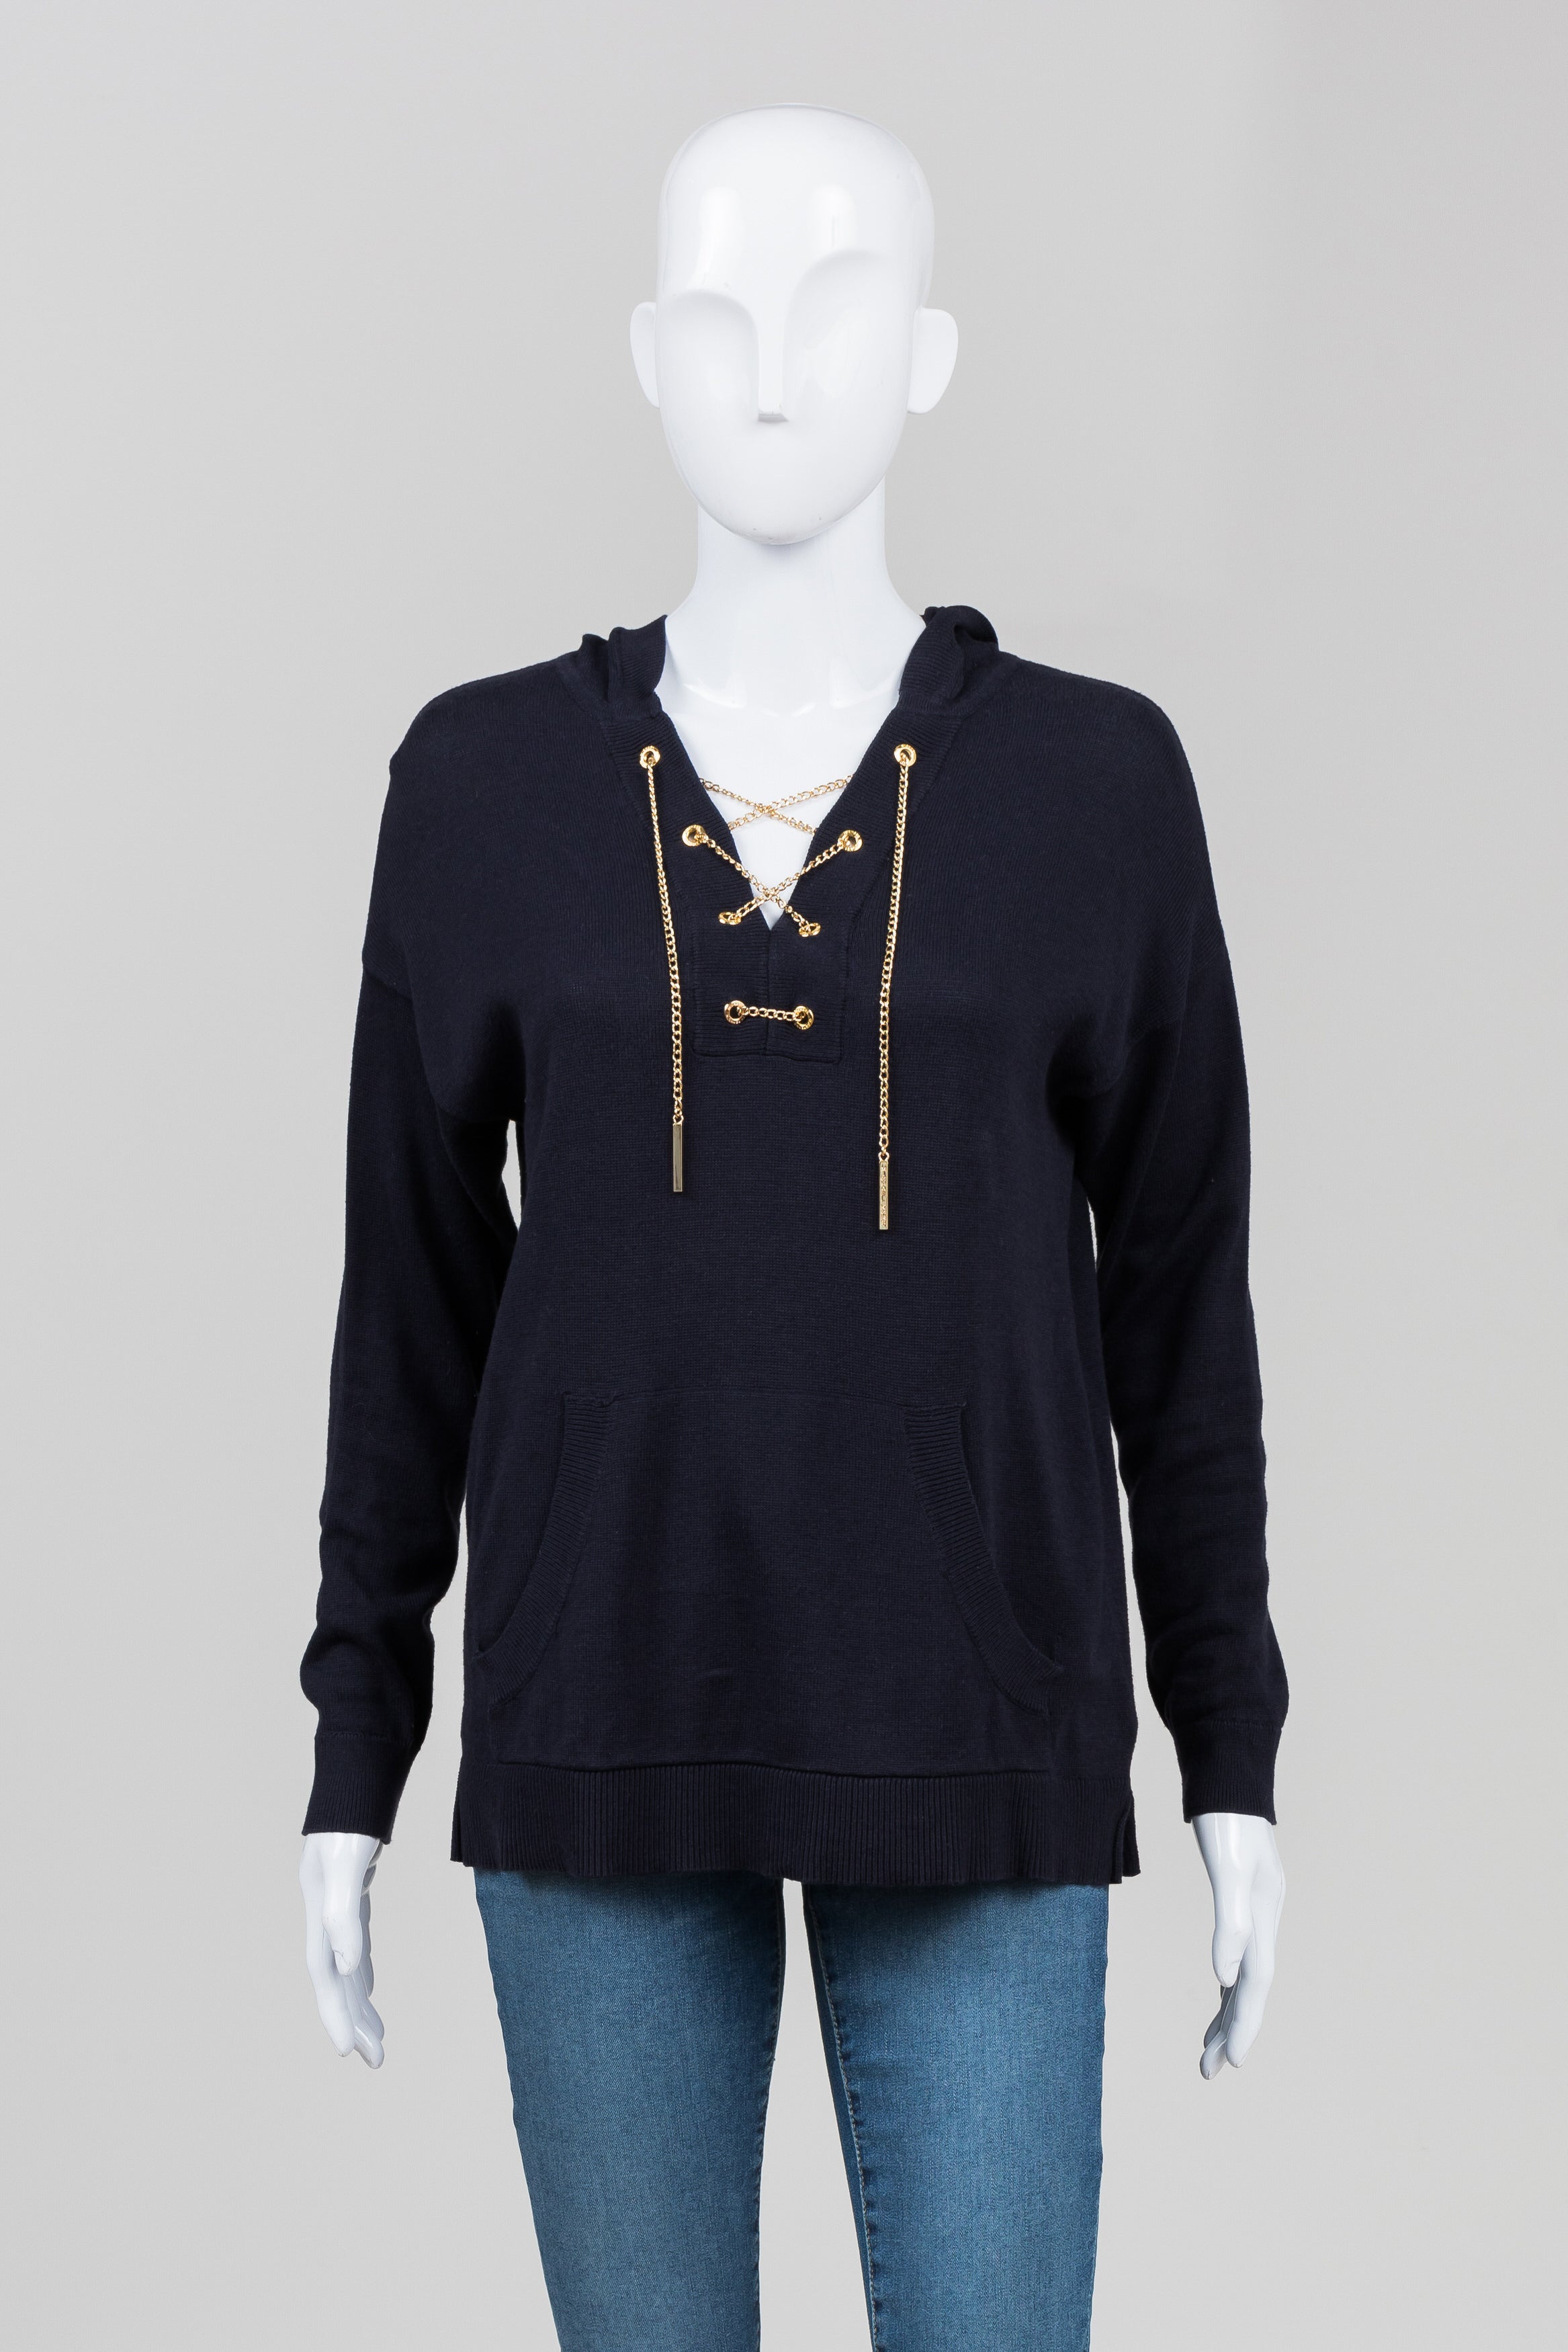 Michael Michael Kors Navy Hooded Sweater w/ Gold Chain Laces (XS)